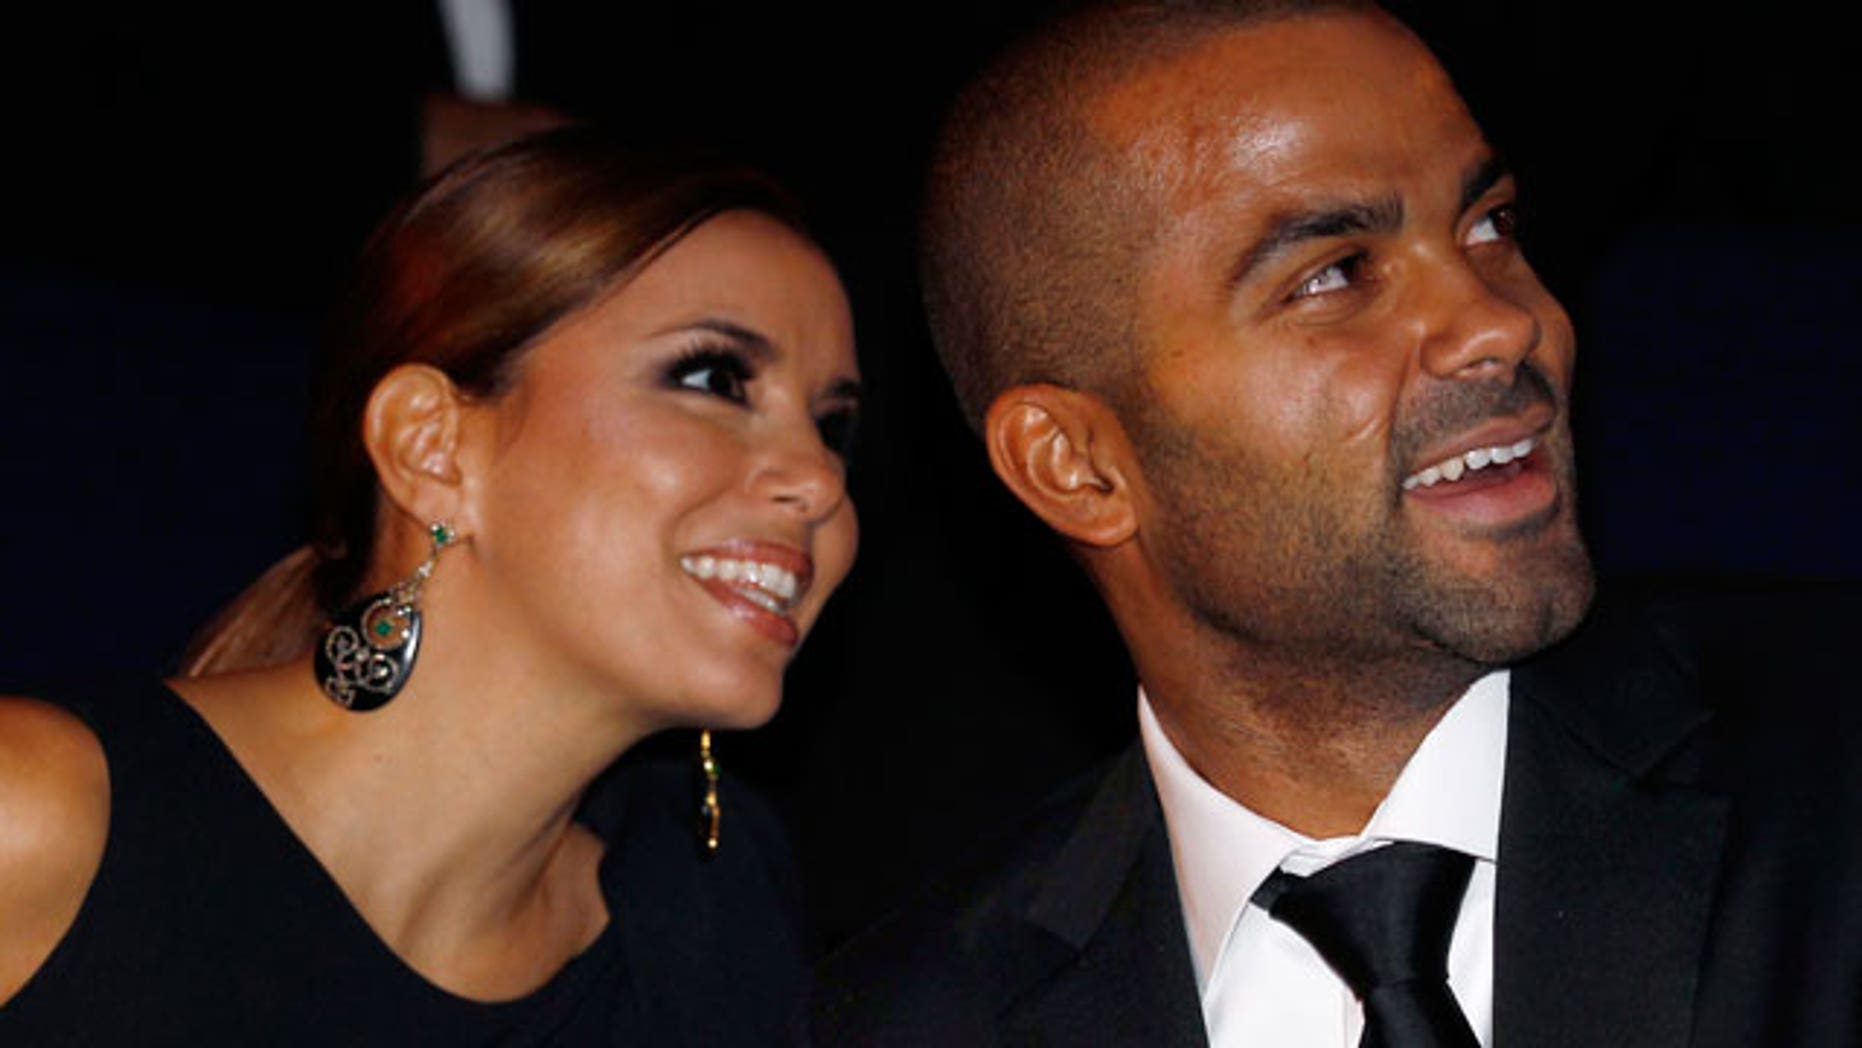 Tony Parker's Relationship With Teammate's Wife Behind Eva ...